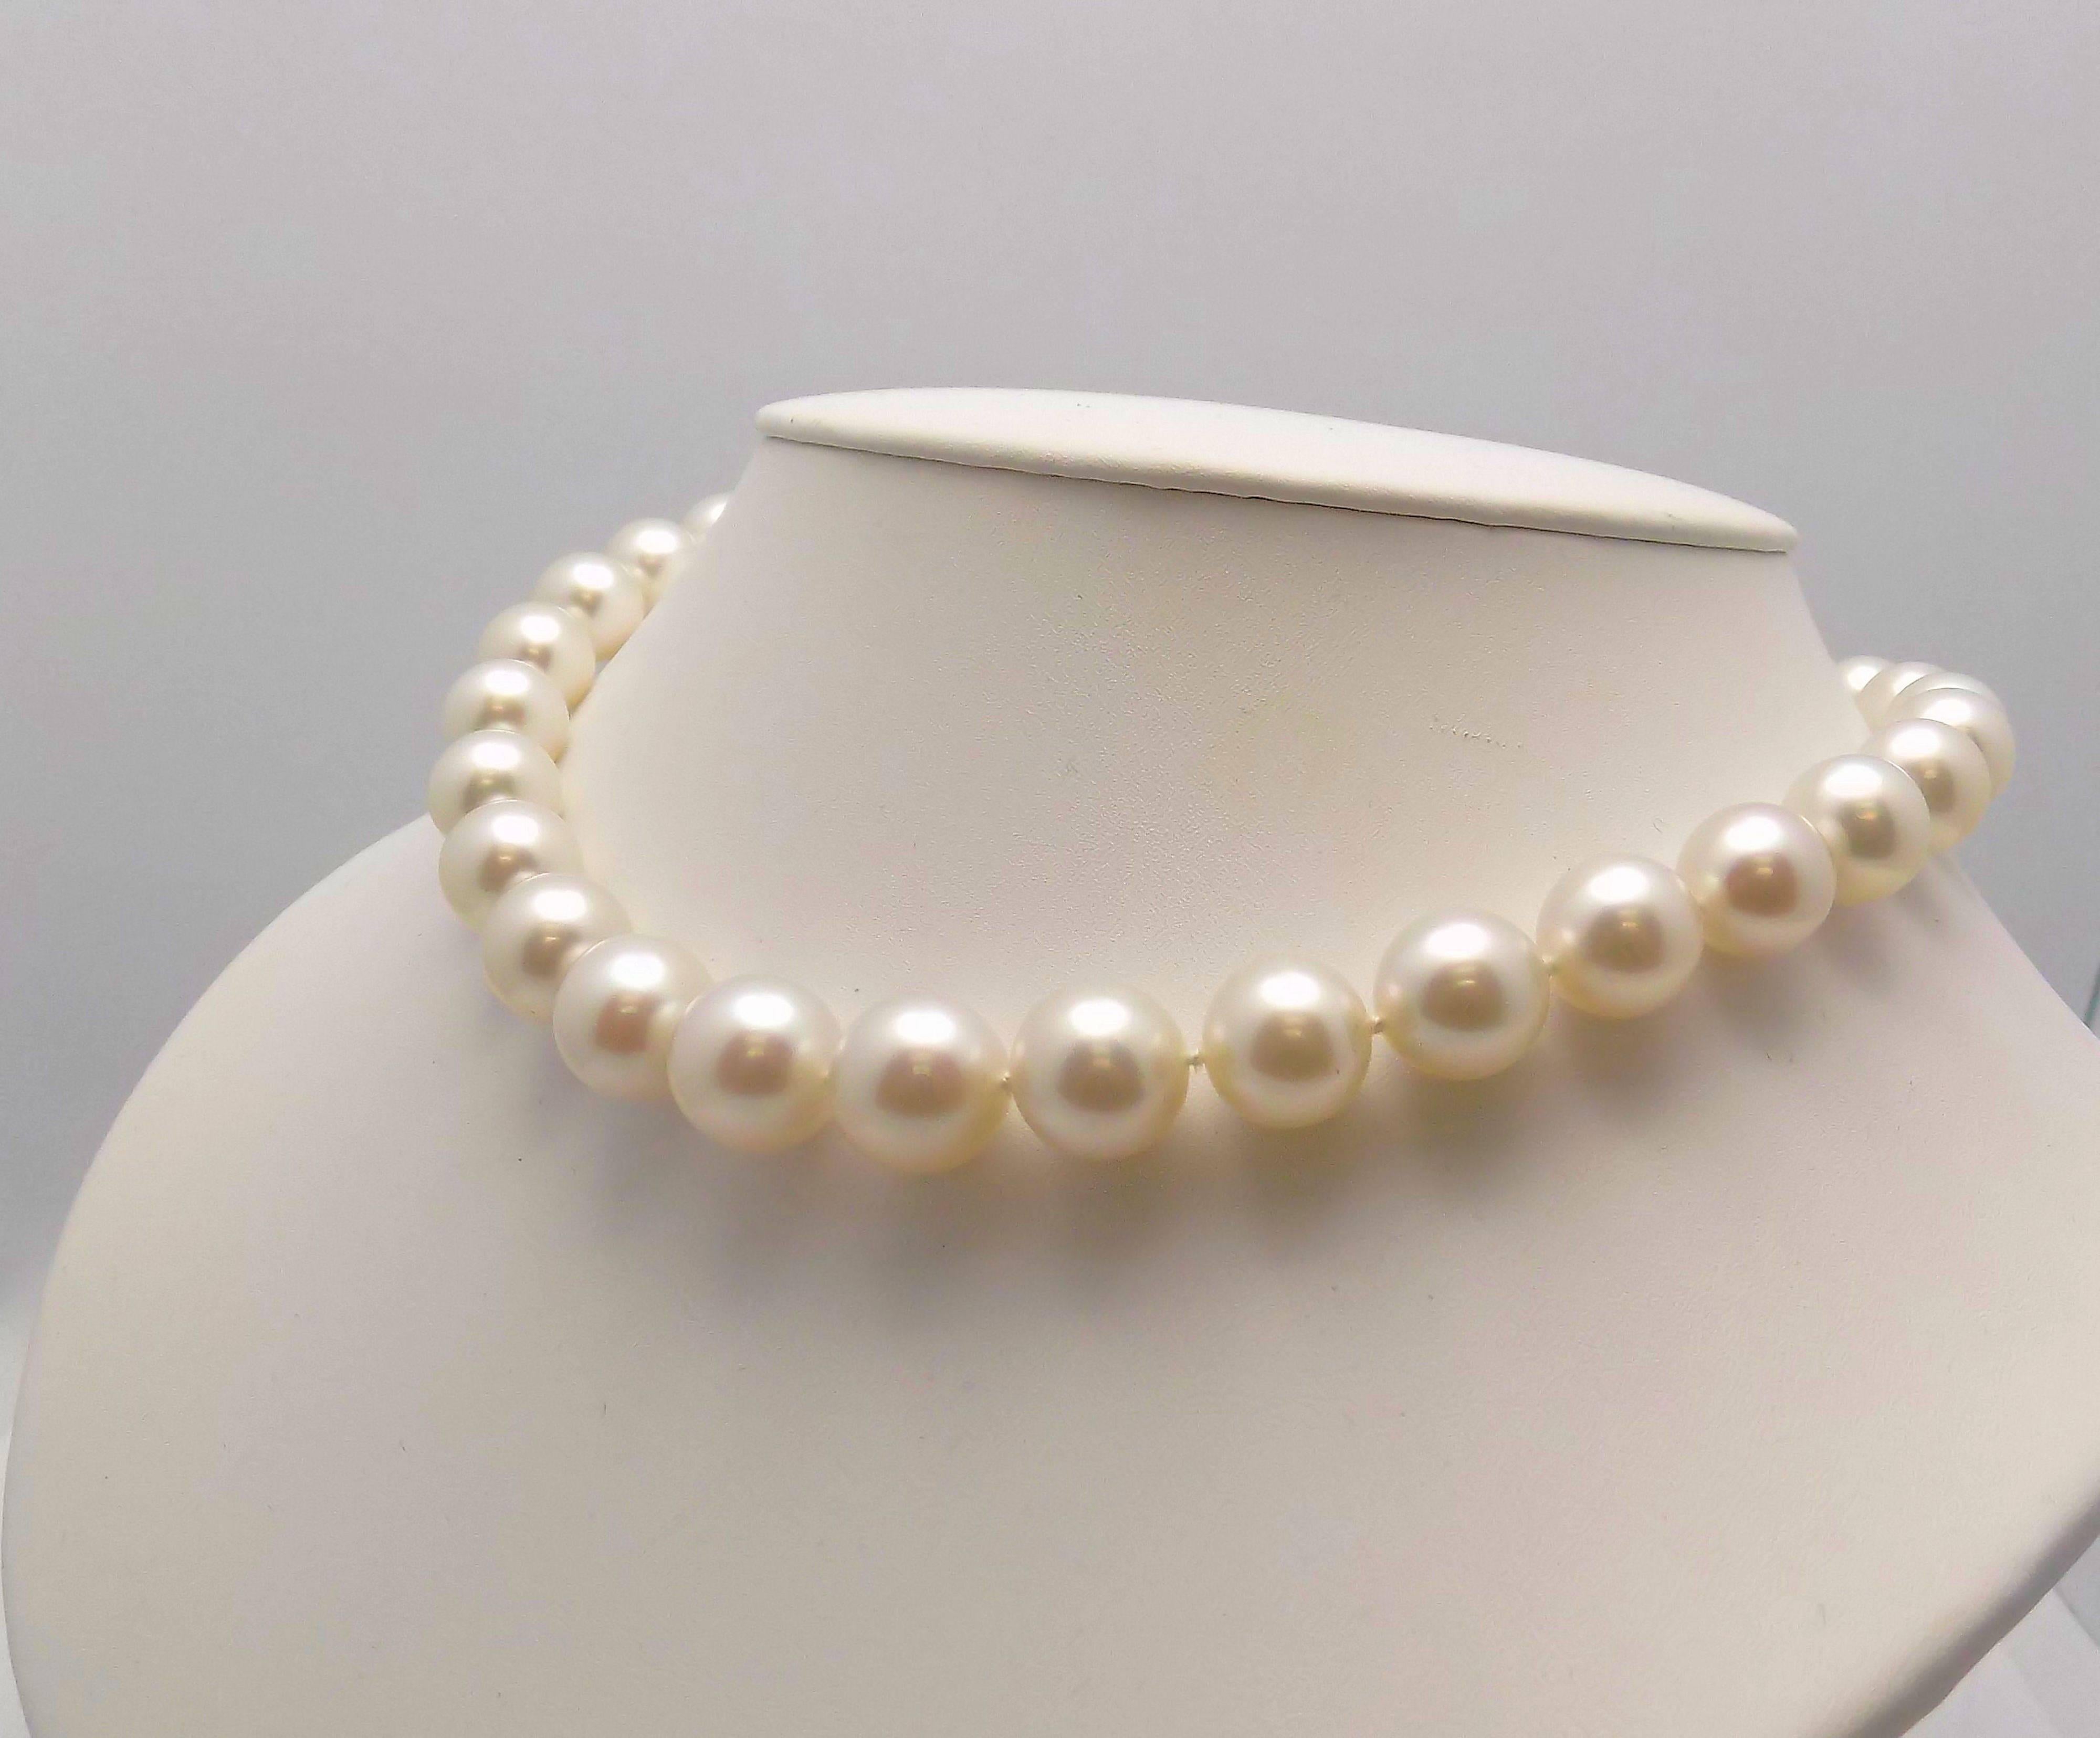 Lustrous Strand of South Sea Cultured Pearls Featuring 33 Round 11-14.2 MM Pearls,  18 Karat White Gold Diamond Pavé Clasp 1.00 Carat Total Weight SI, H, 18